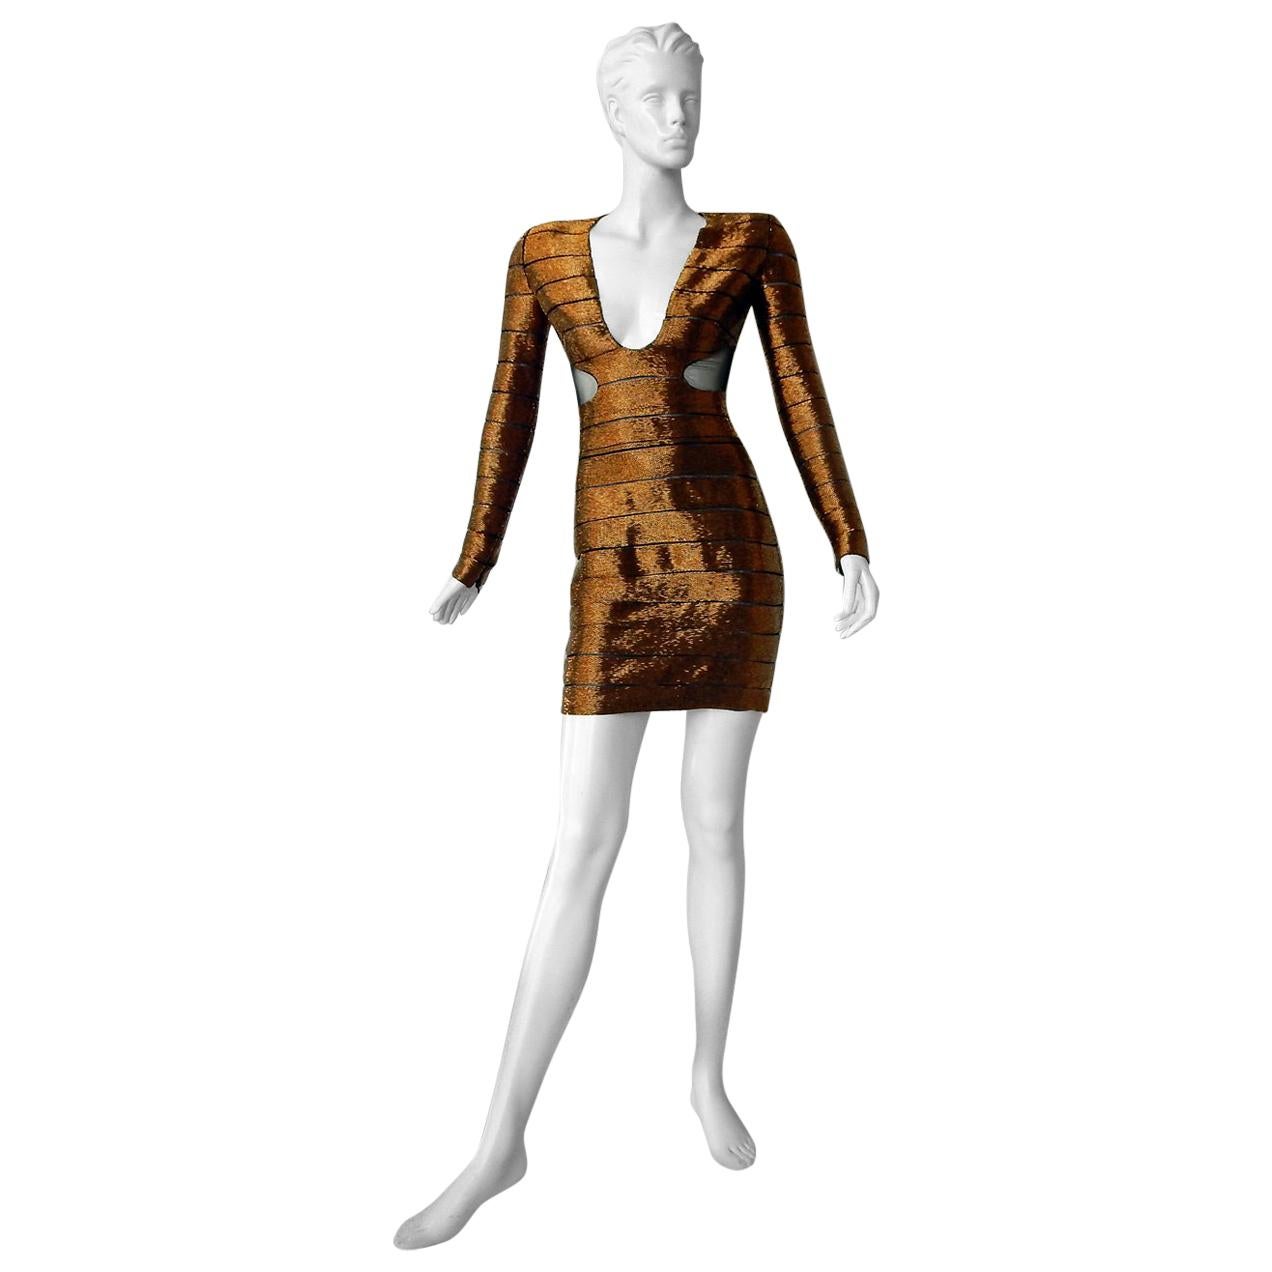 Tom Ford "WOW" $27K Bronze Beaded Cut-Out Mini Evening Dress   New!